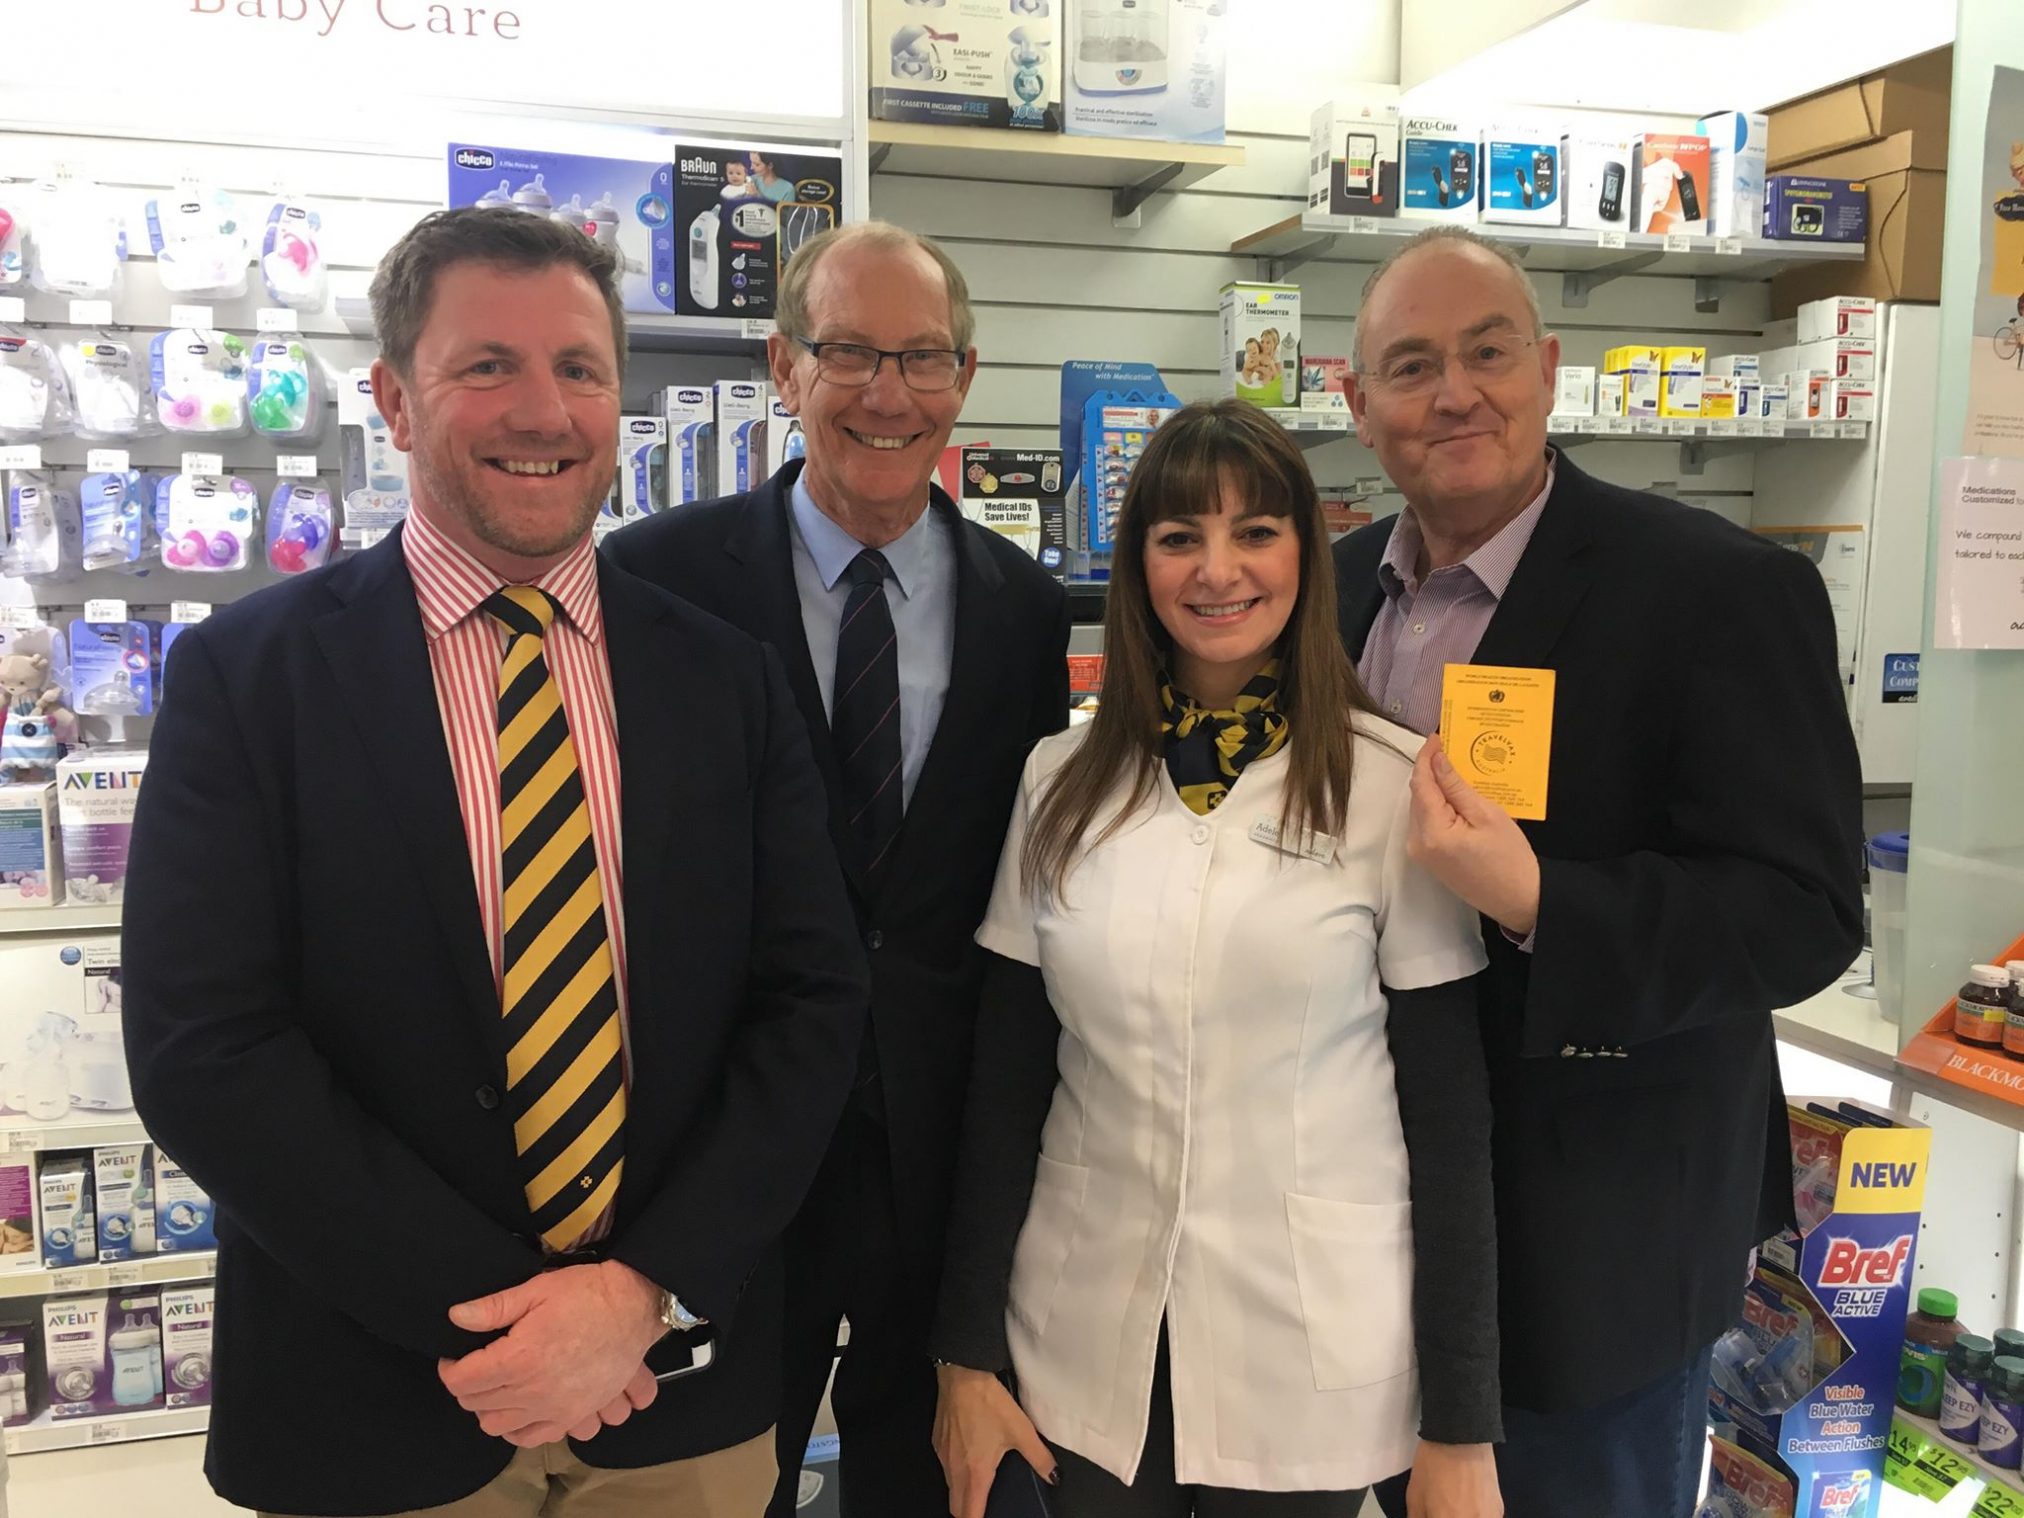 NSW Guild President David Heffernan, NSW PSA President Peter Carroll, NSW Guild committee member Adele Tahan and and Shadow Health Minister Walt Secord.